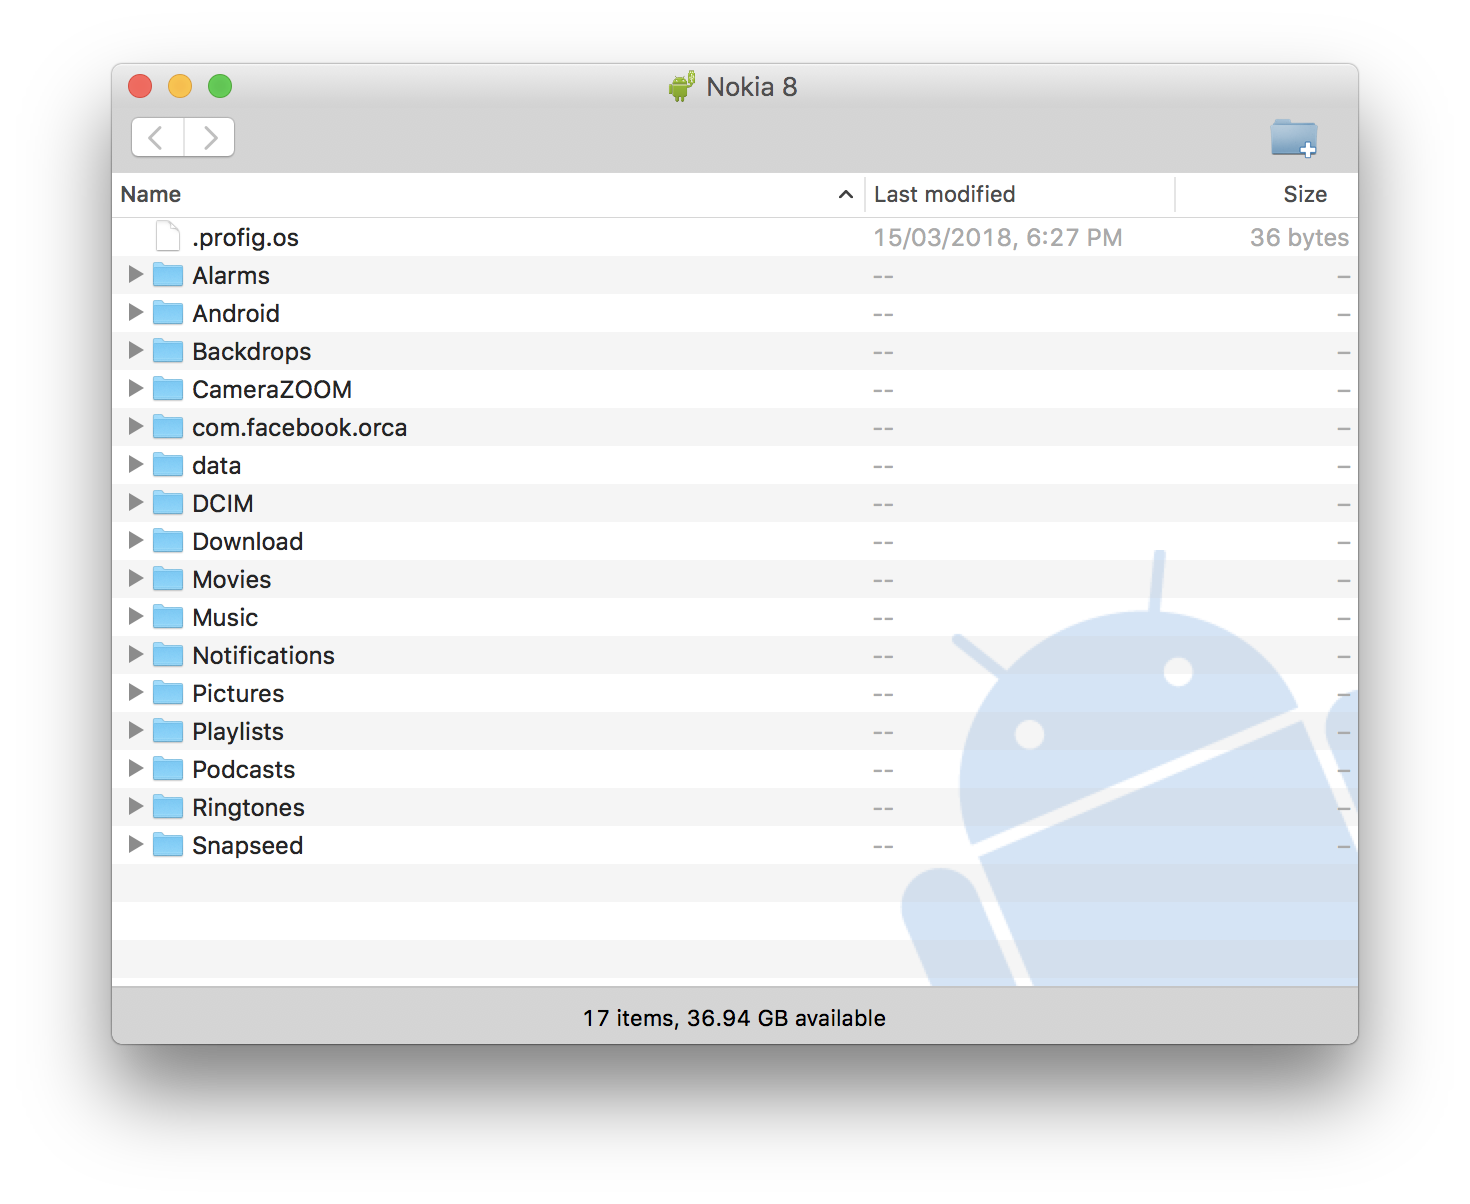 how to download pics from android to mac